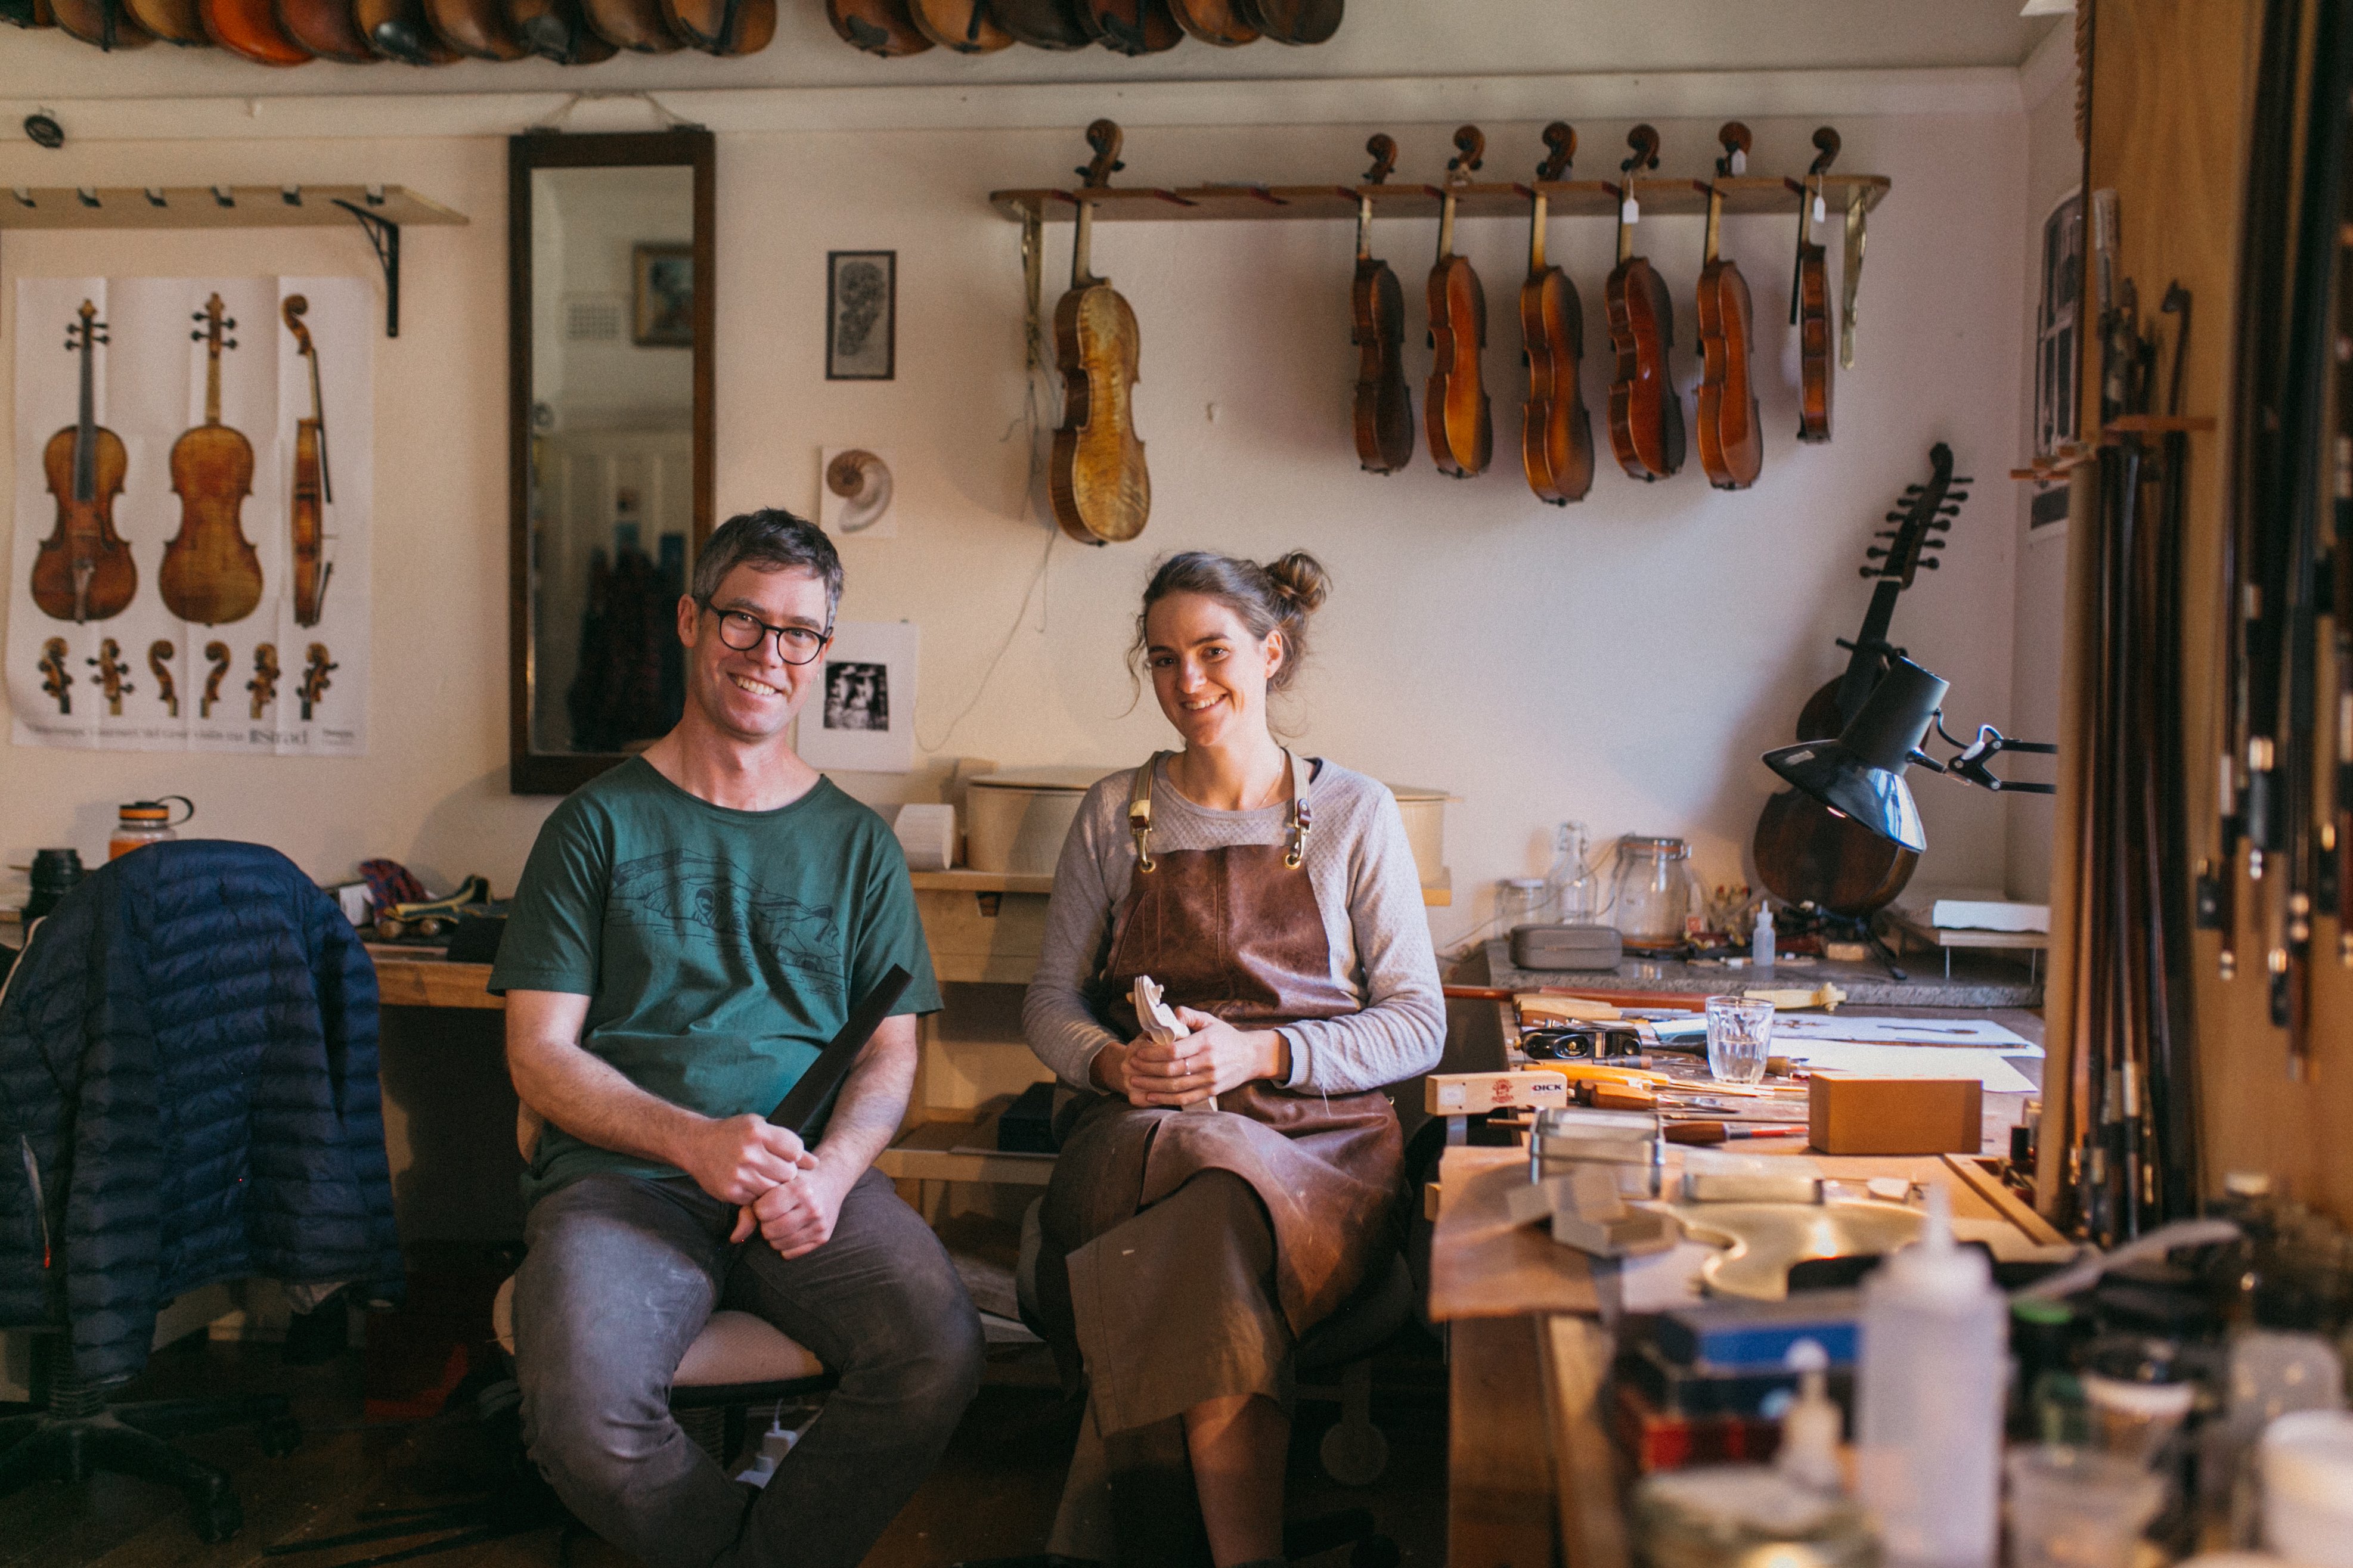 Violinmakers' collaboration is music to our ears